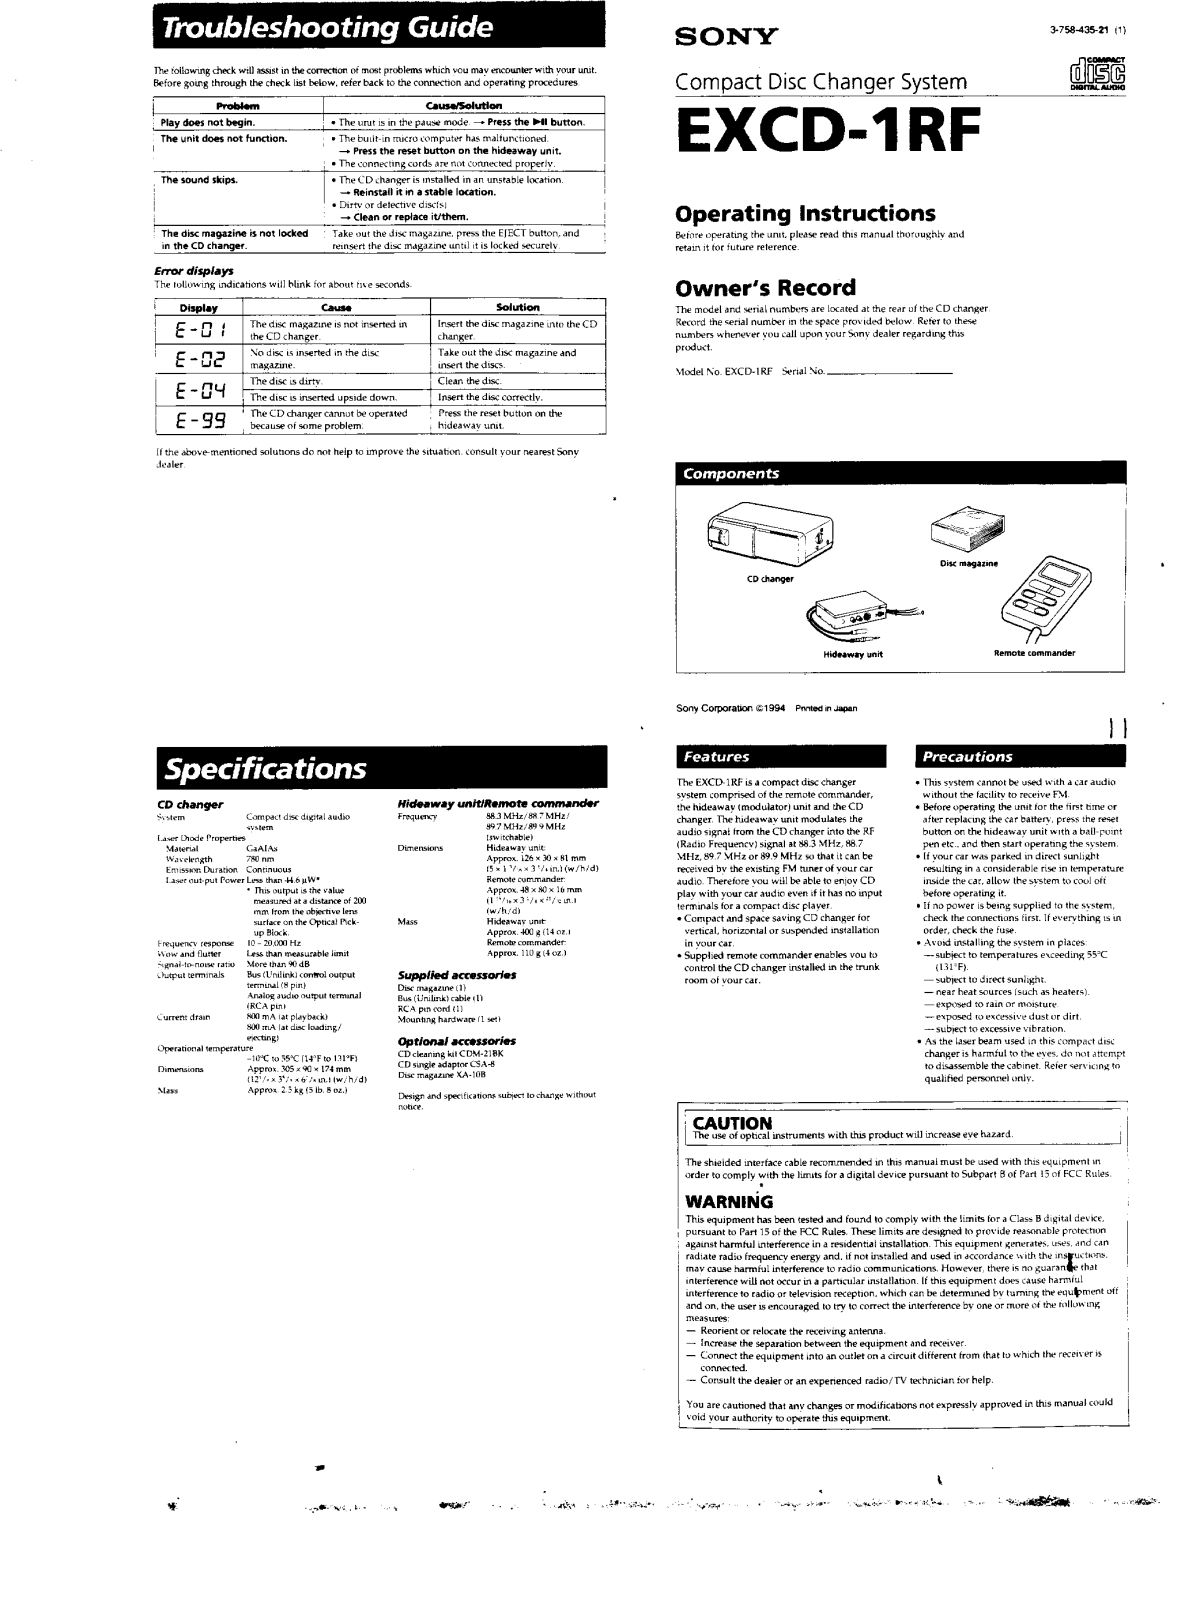 Sony EXCD1RF Operating Manual